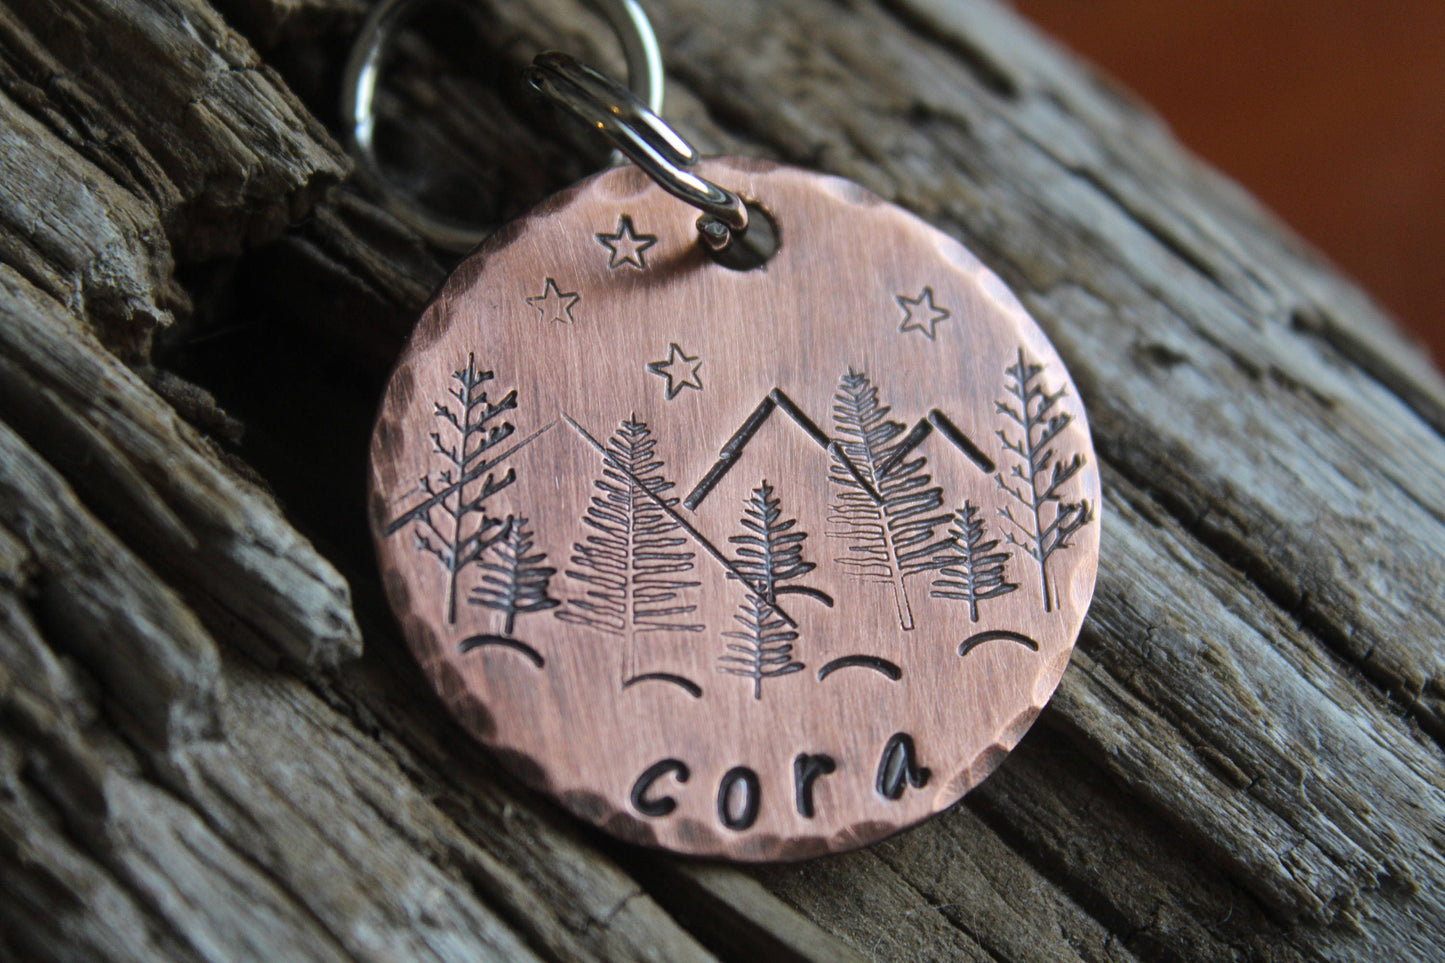 Pet ID with Mountains, Wilderness Tag, The Cora, Dog ID Tag, Dog Tag with Trees, Hand stamped ID, Custom Dog Tag, Tag for Dog, Pet Id Stars